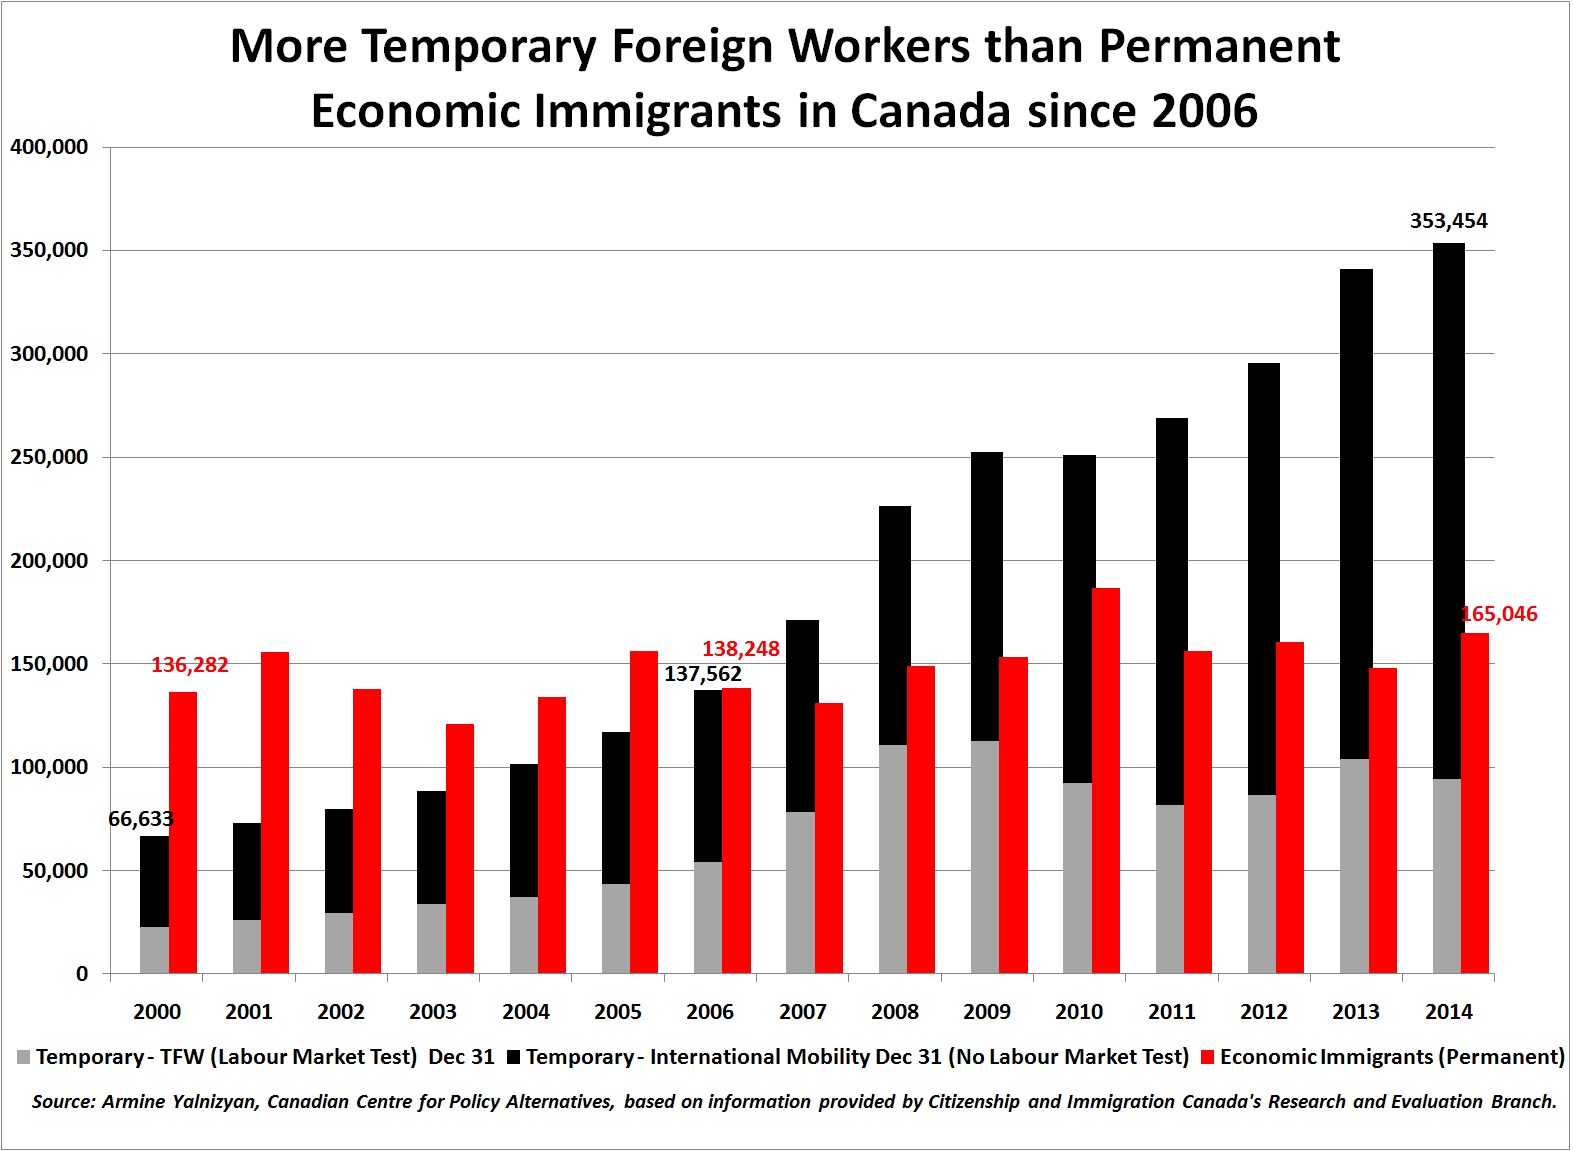 There have been more Temporary Foreign Workers than Permanent Economic Immigrants in Canada since 2006